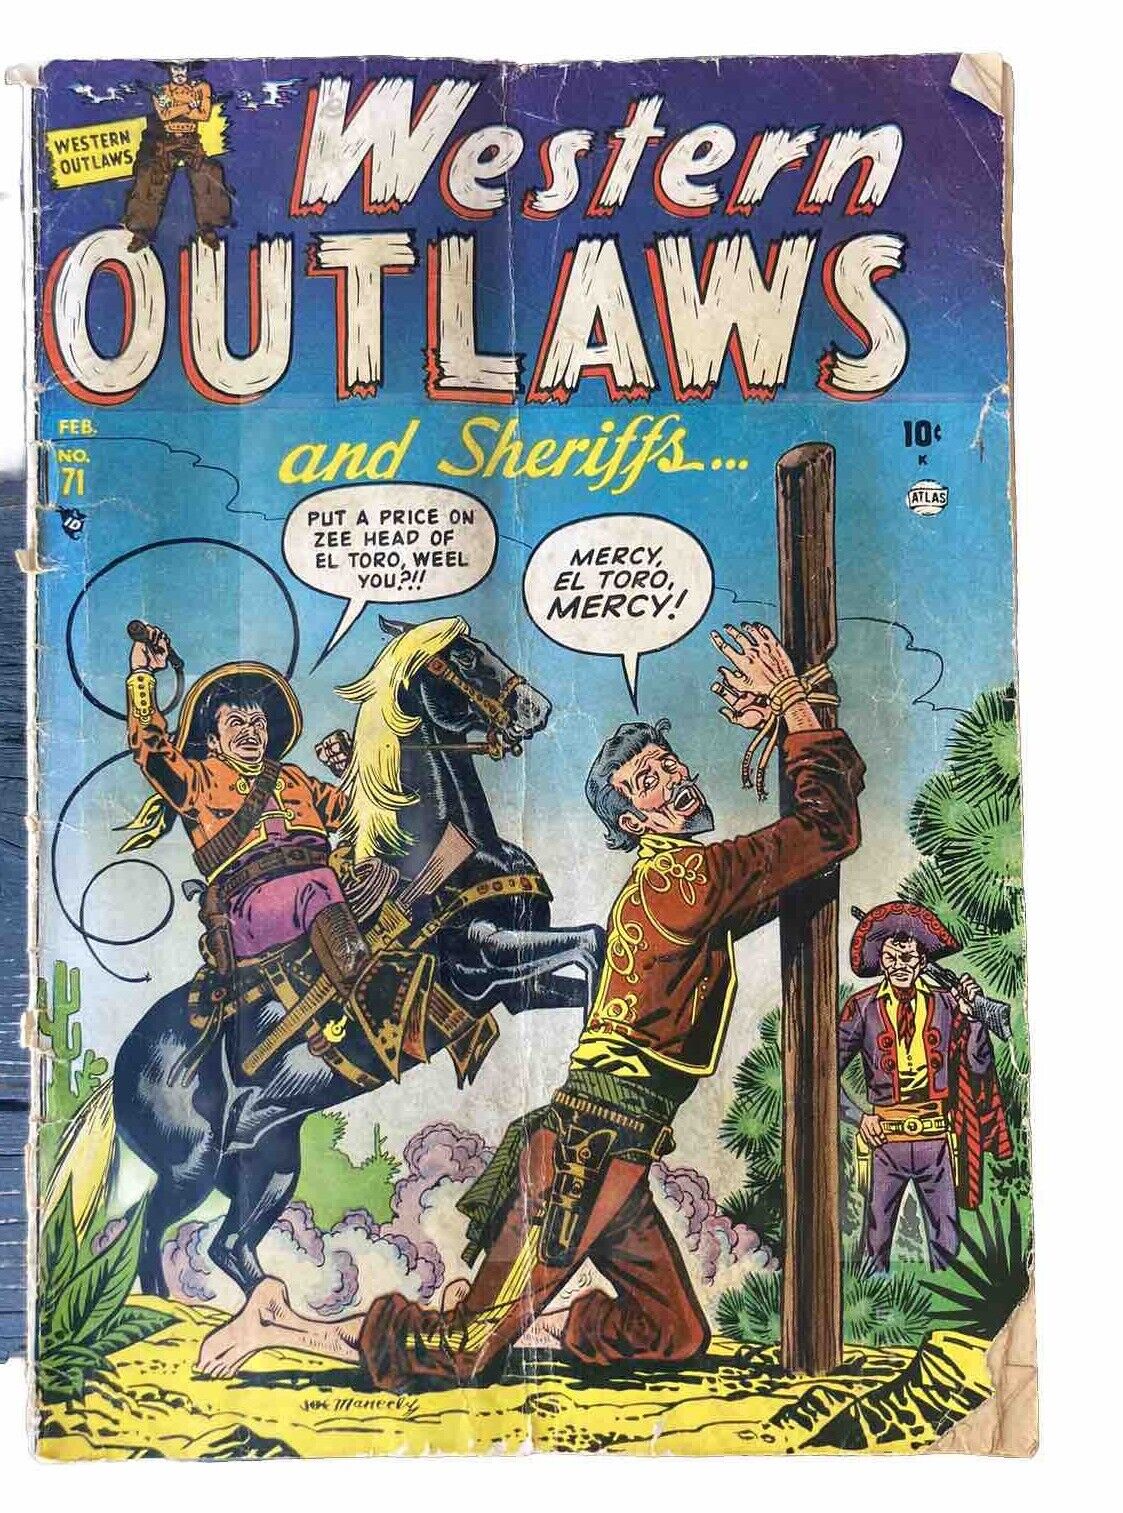 WESTERN OUTLAWS AND SHERIFFS #71 Golden Age ATLAS Cowboy 1952 Comic Book